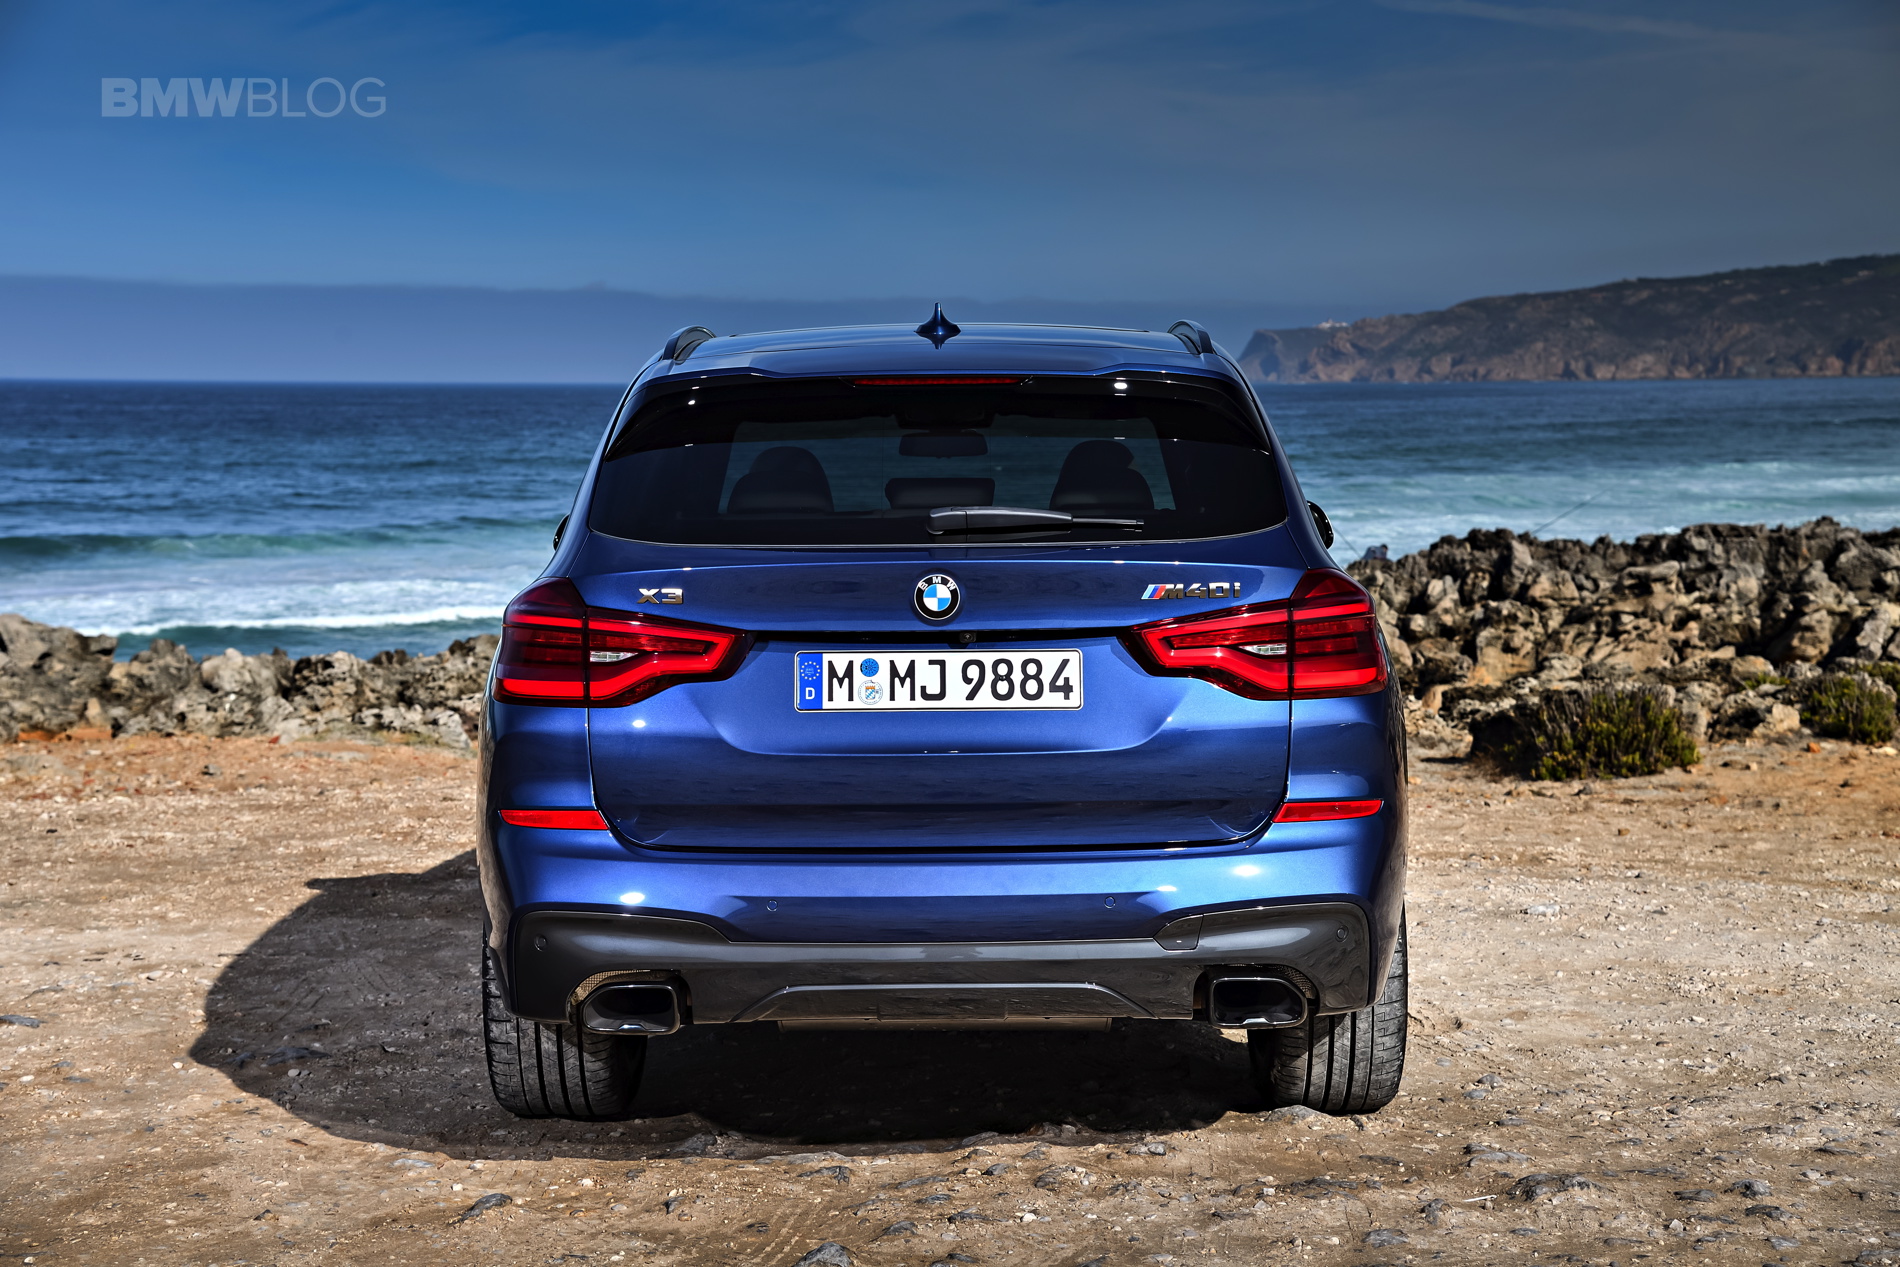 BMW X3 M40i shines under the Portugal's sun